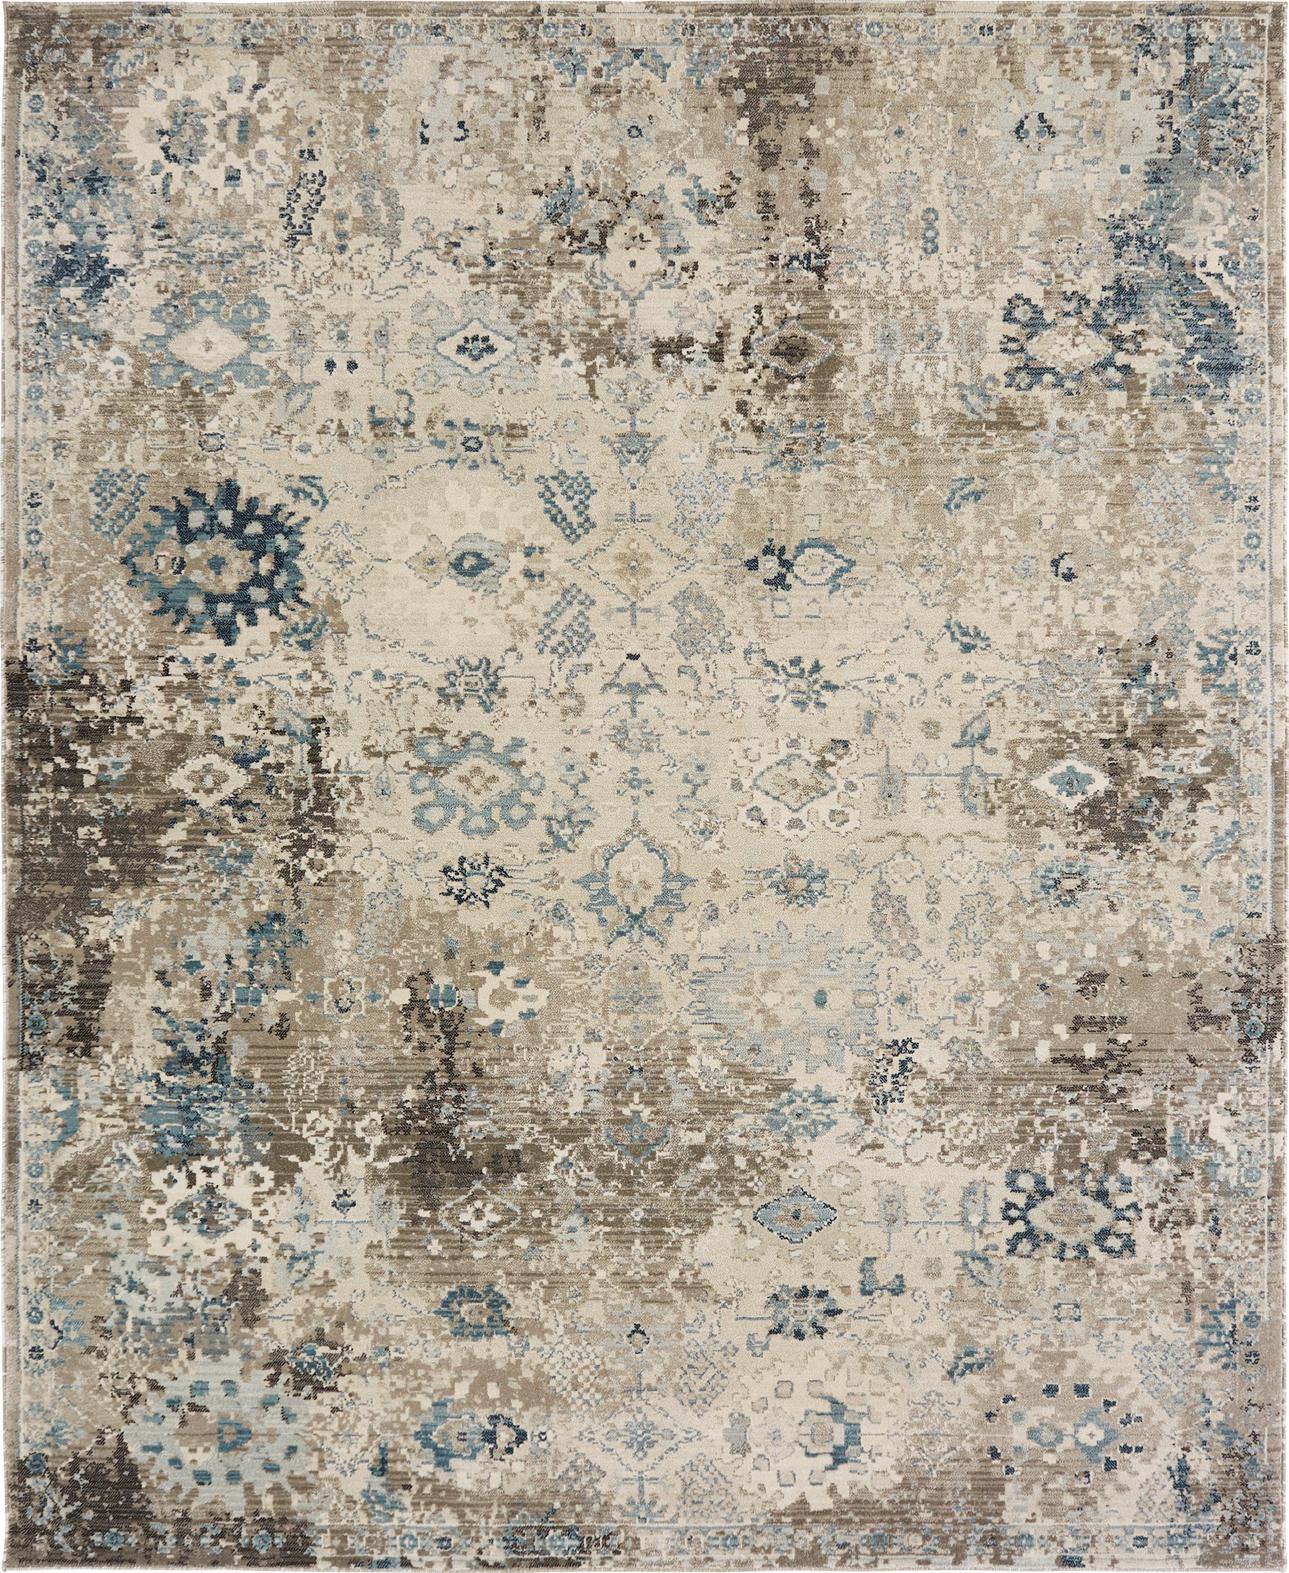 Hand Loomed Wool Blue Dk Contemporary India Rug 9' x 12'